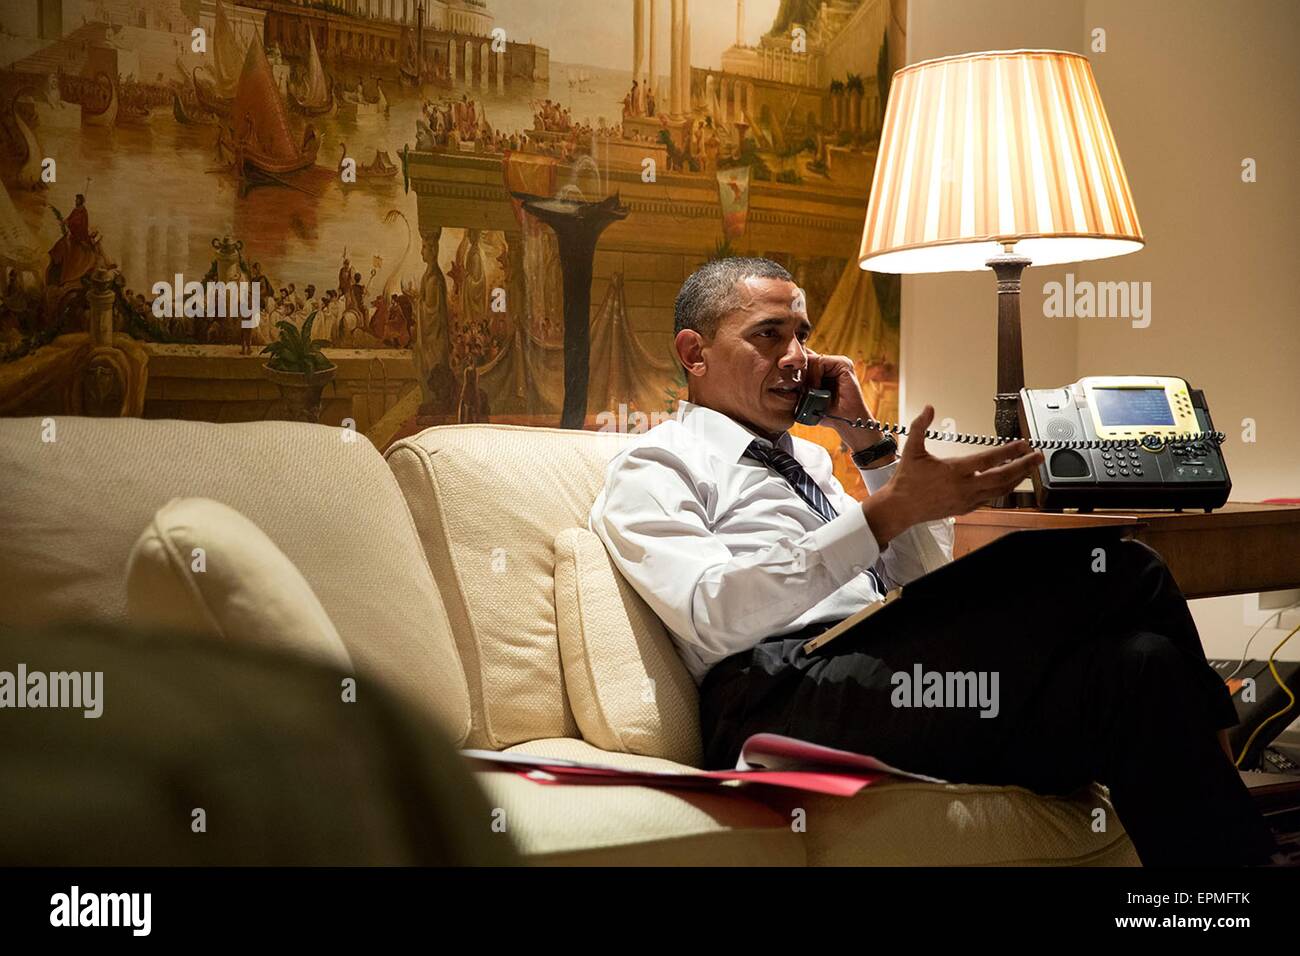 U.S. President Barack Obama talks on the phone with European leaders to consult about the situation in eastern Ukraine April 25, 2104 in Seoul, Republic of Korea. The President spoke with President Franois Hollande of France, Chancellor Angela Merkel of Germany, Prime Minister Matteo Renzi of Italy, and Prime Minister David Cameron of the United Kingdom from his hotel suite in Seoul. Stock Photo